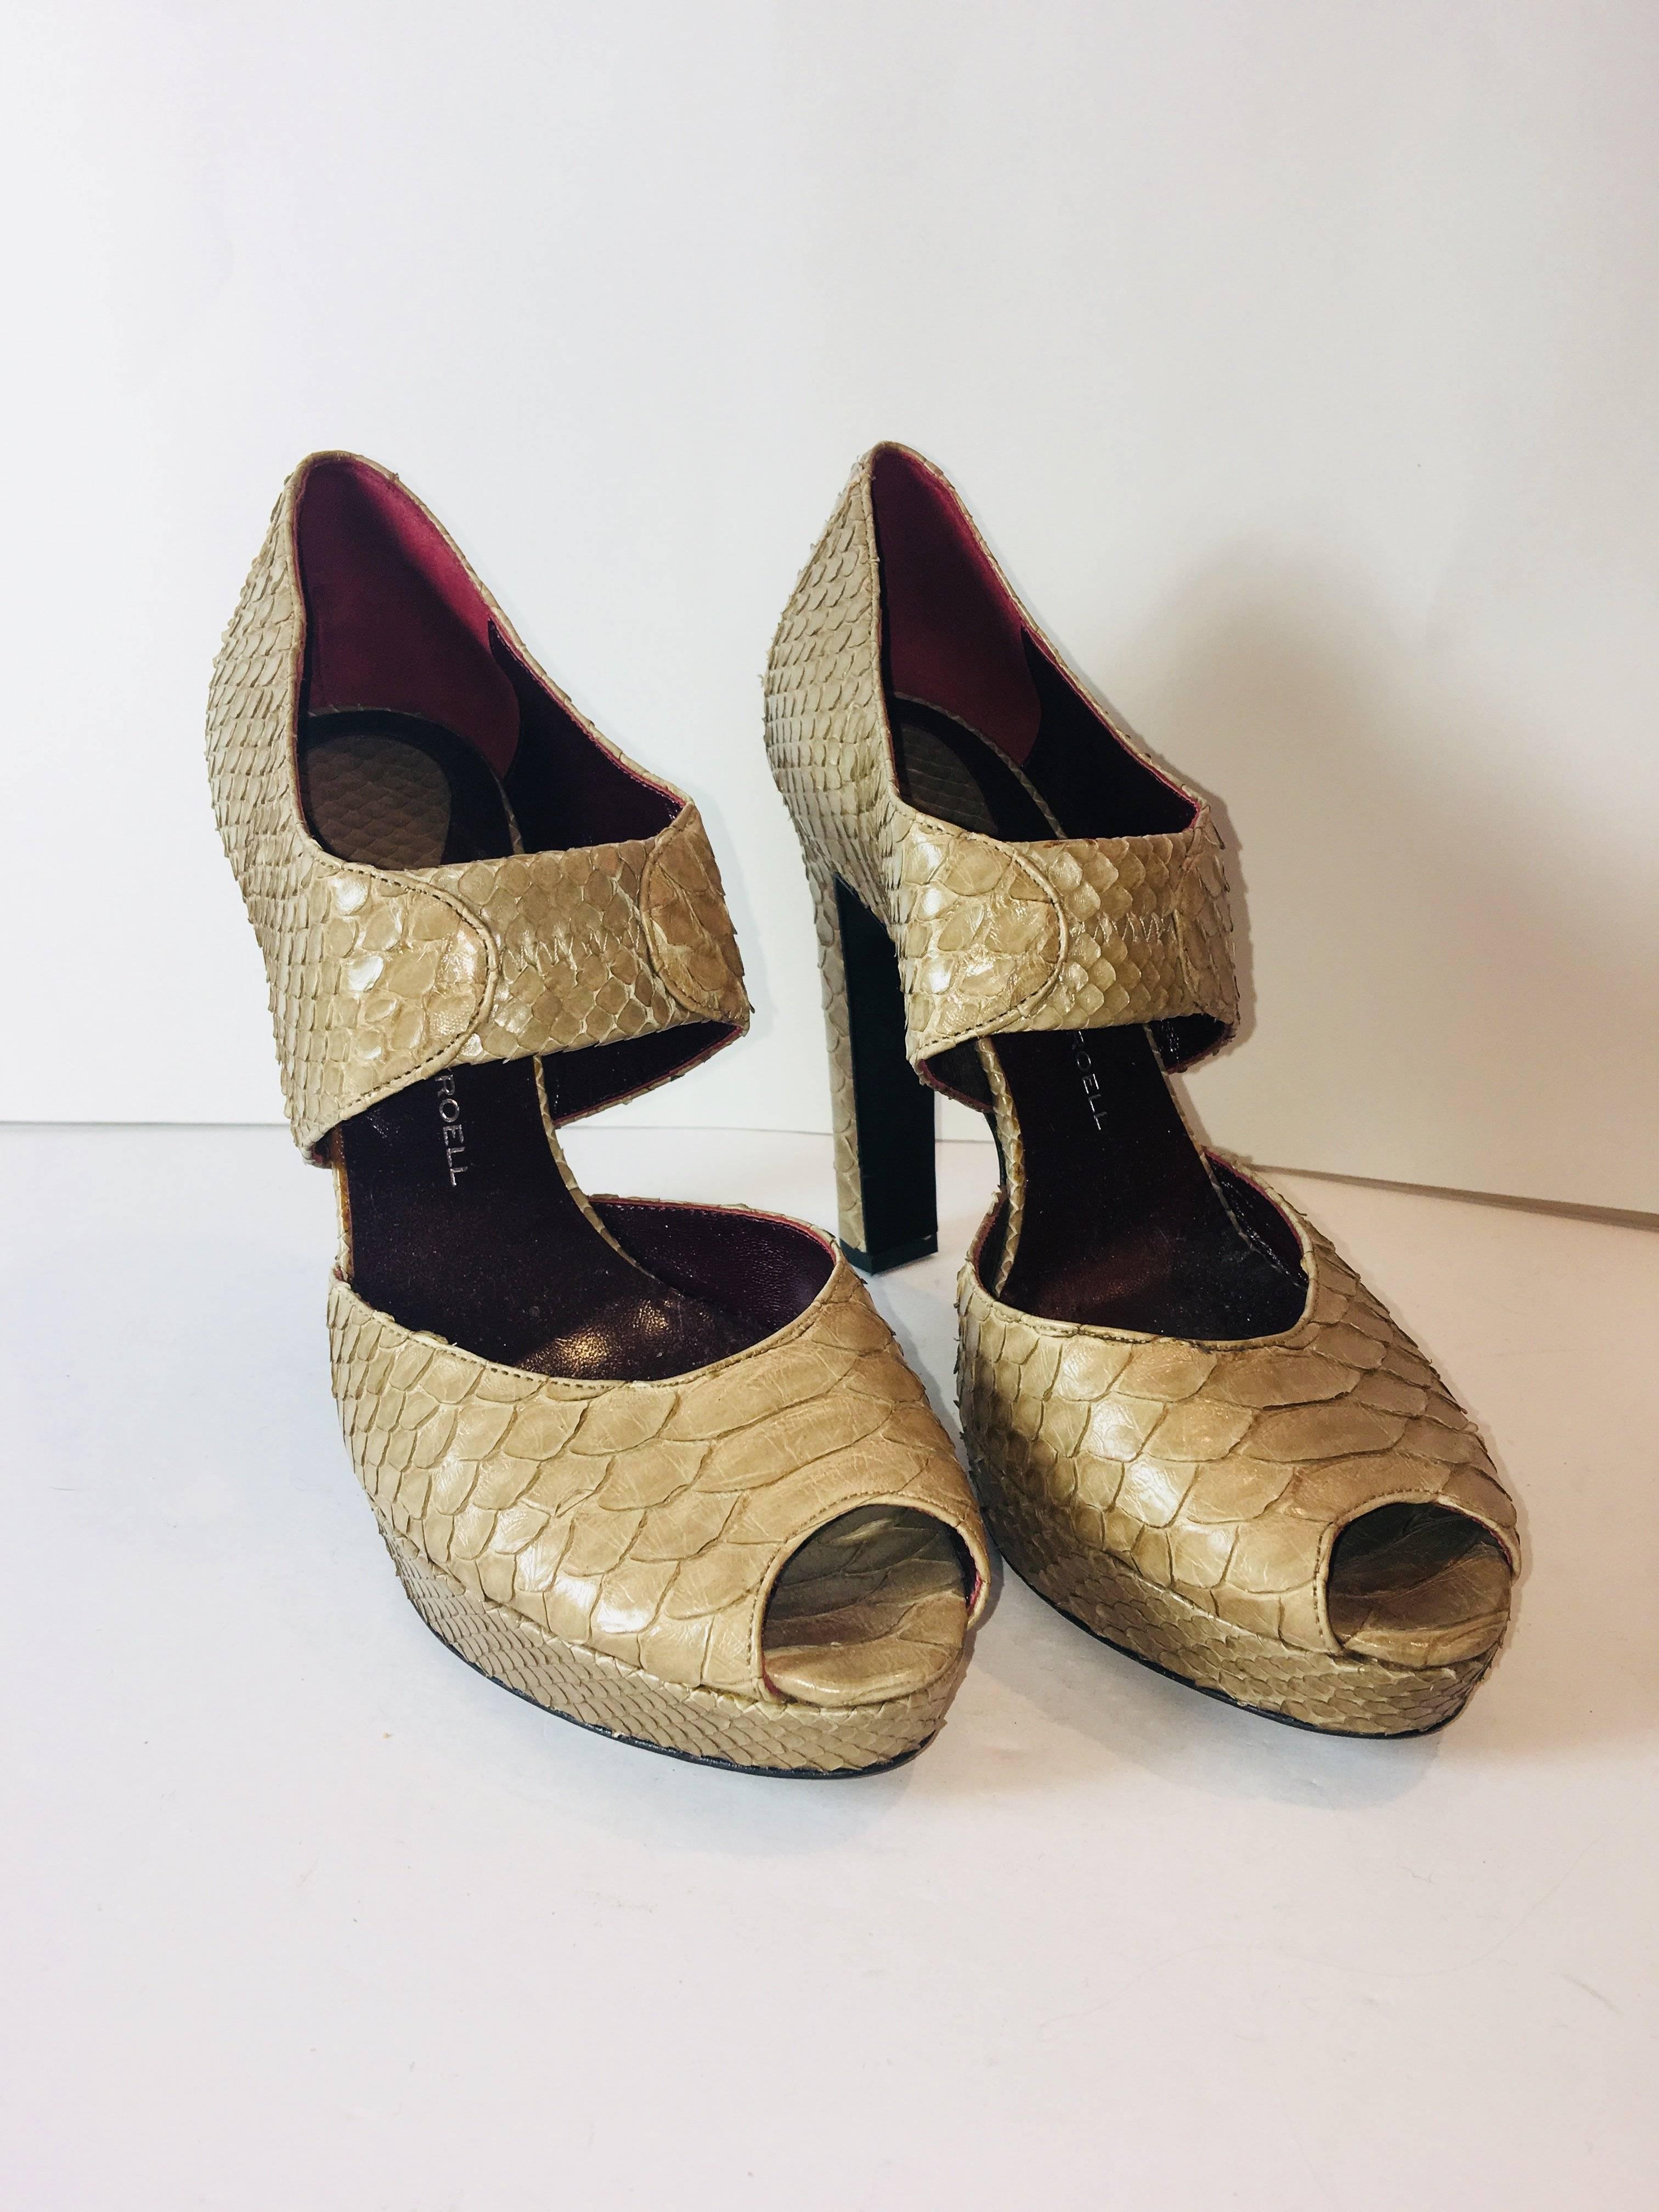 Devi Kroell Tan Python Peep Toe Platforms with Thick Heels and Ankle Strap.